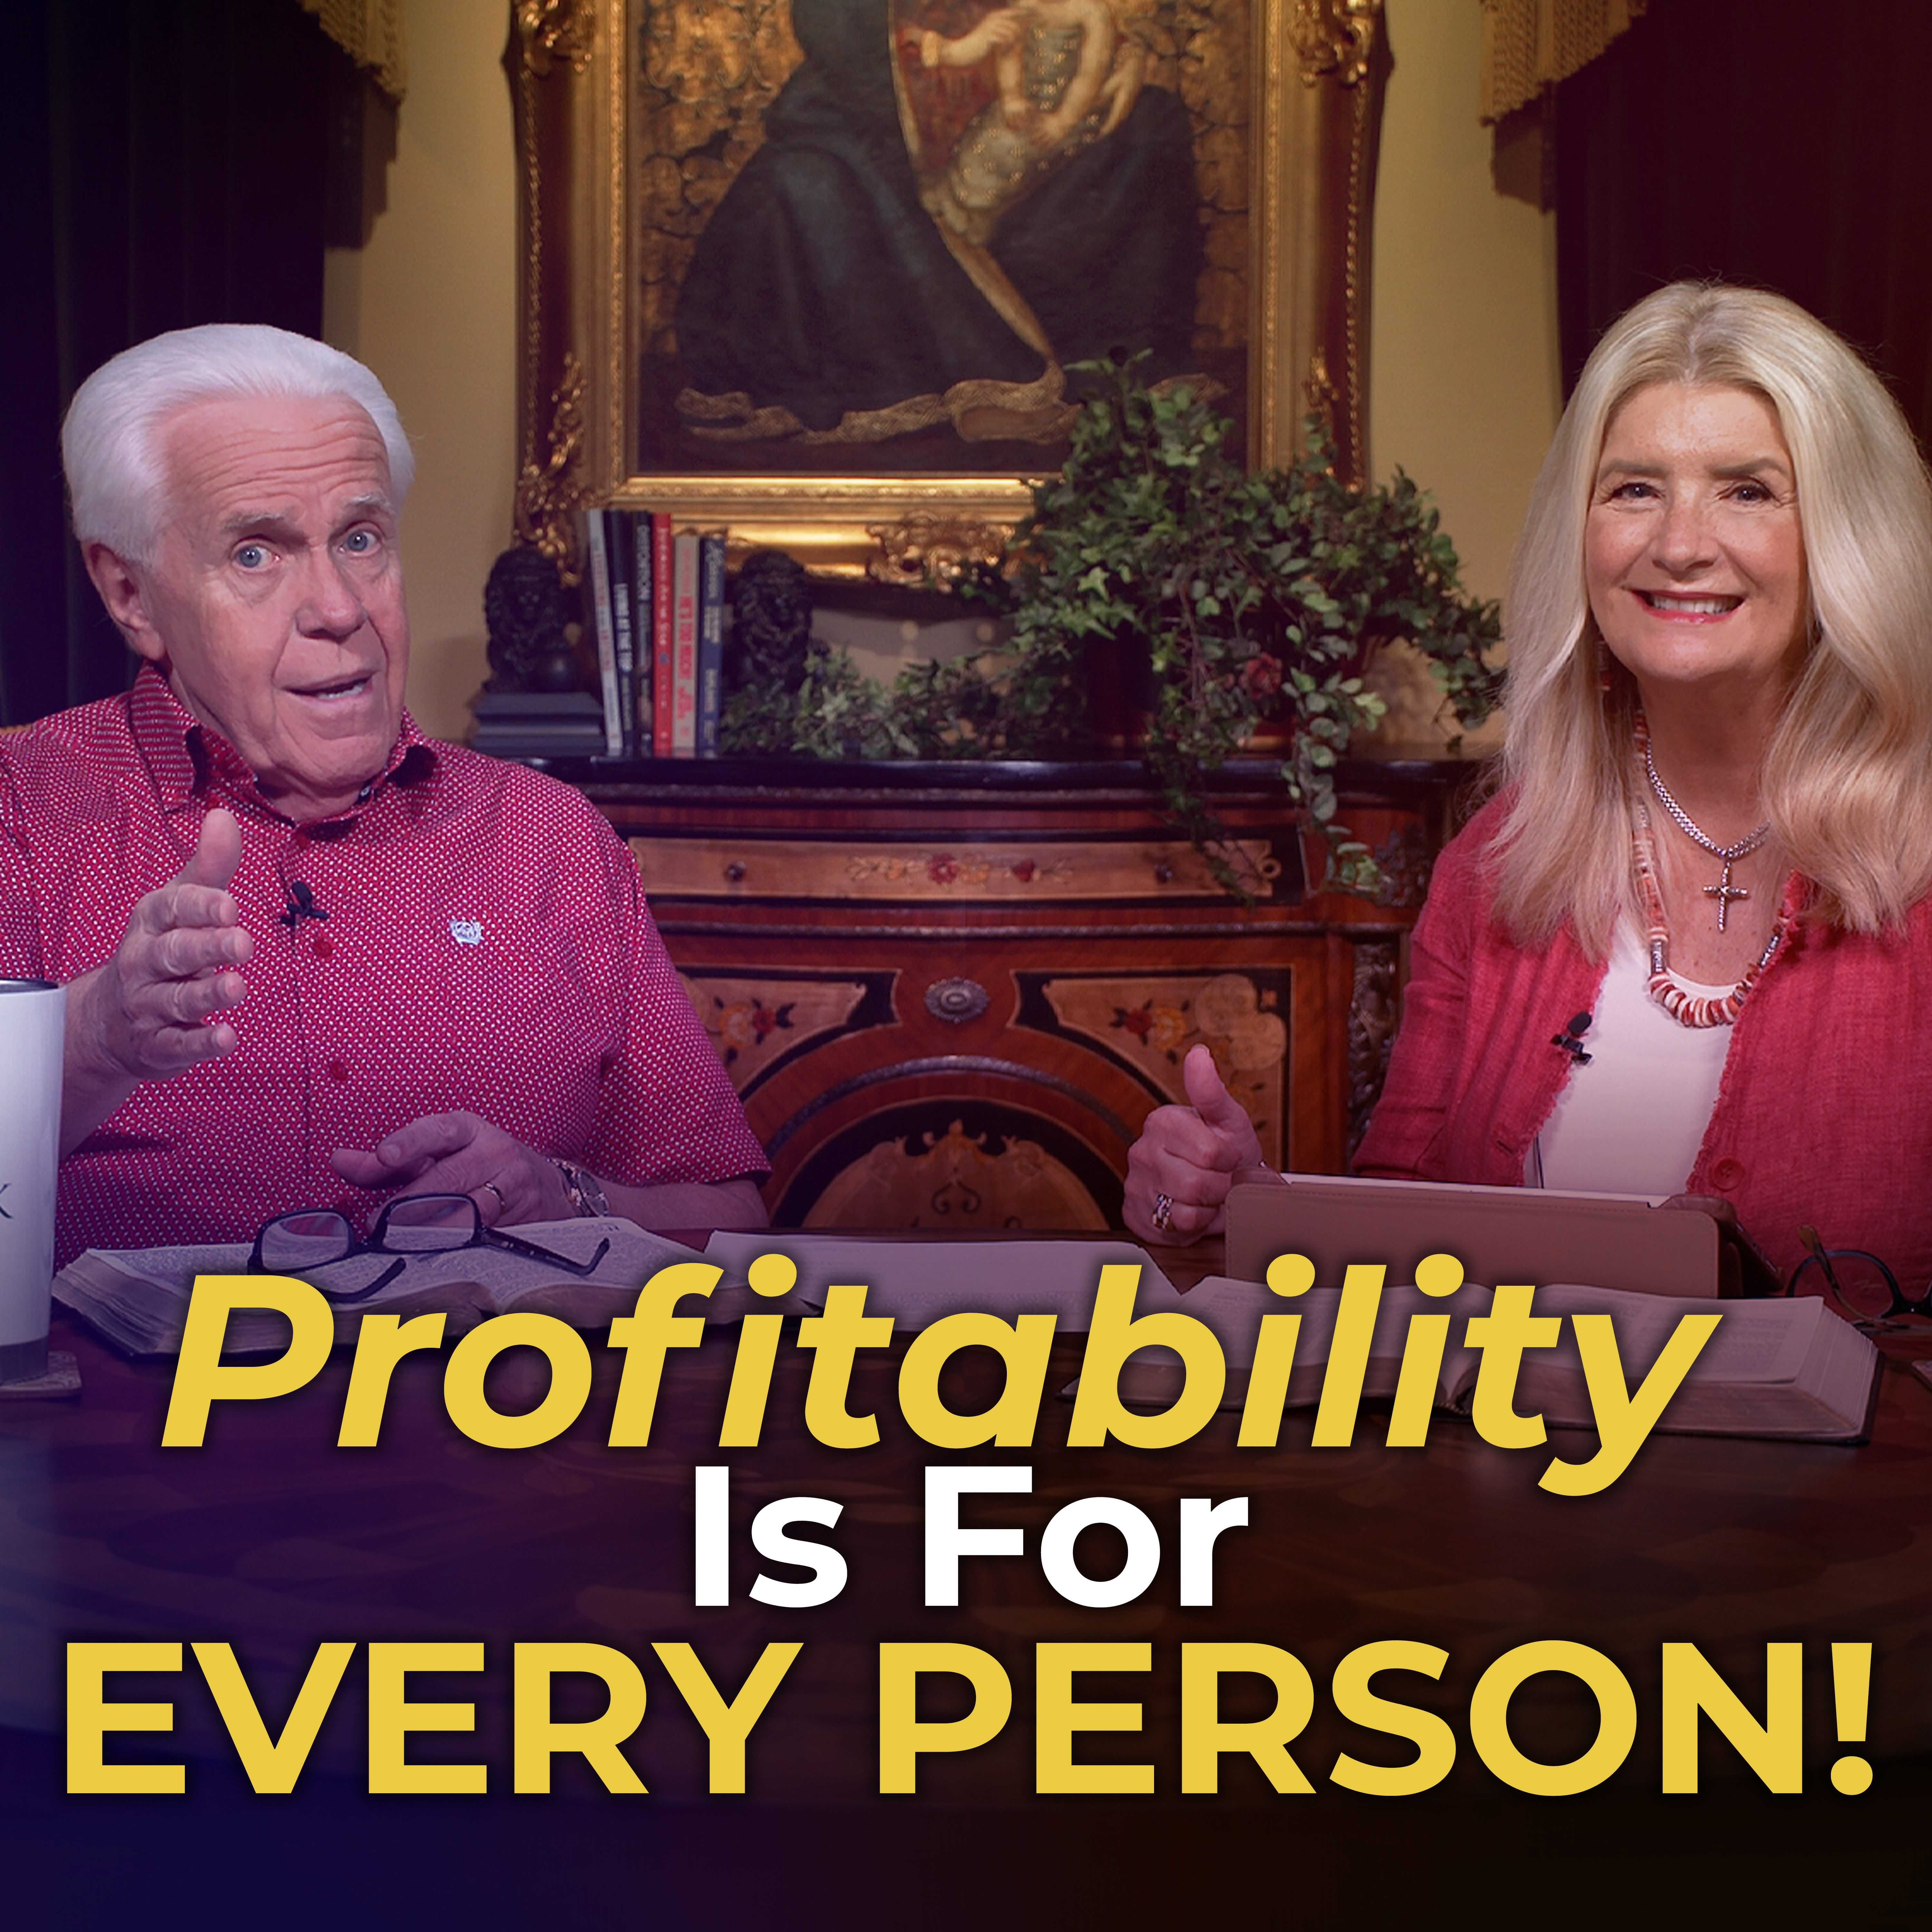 Profitability Is For Every Person!